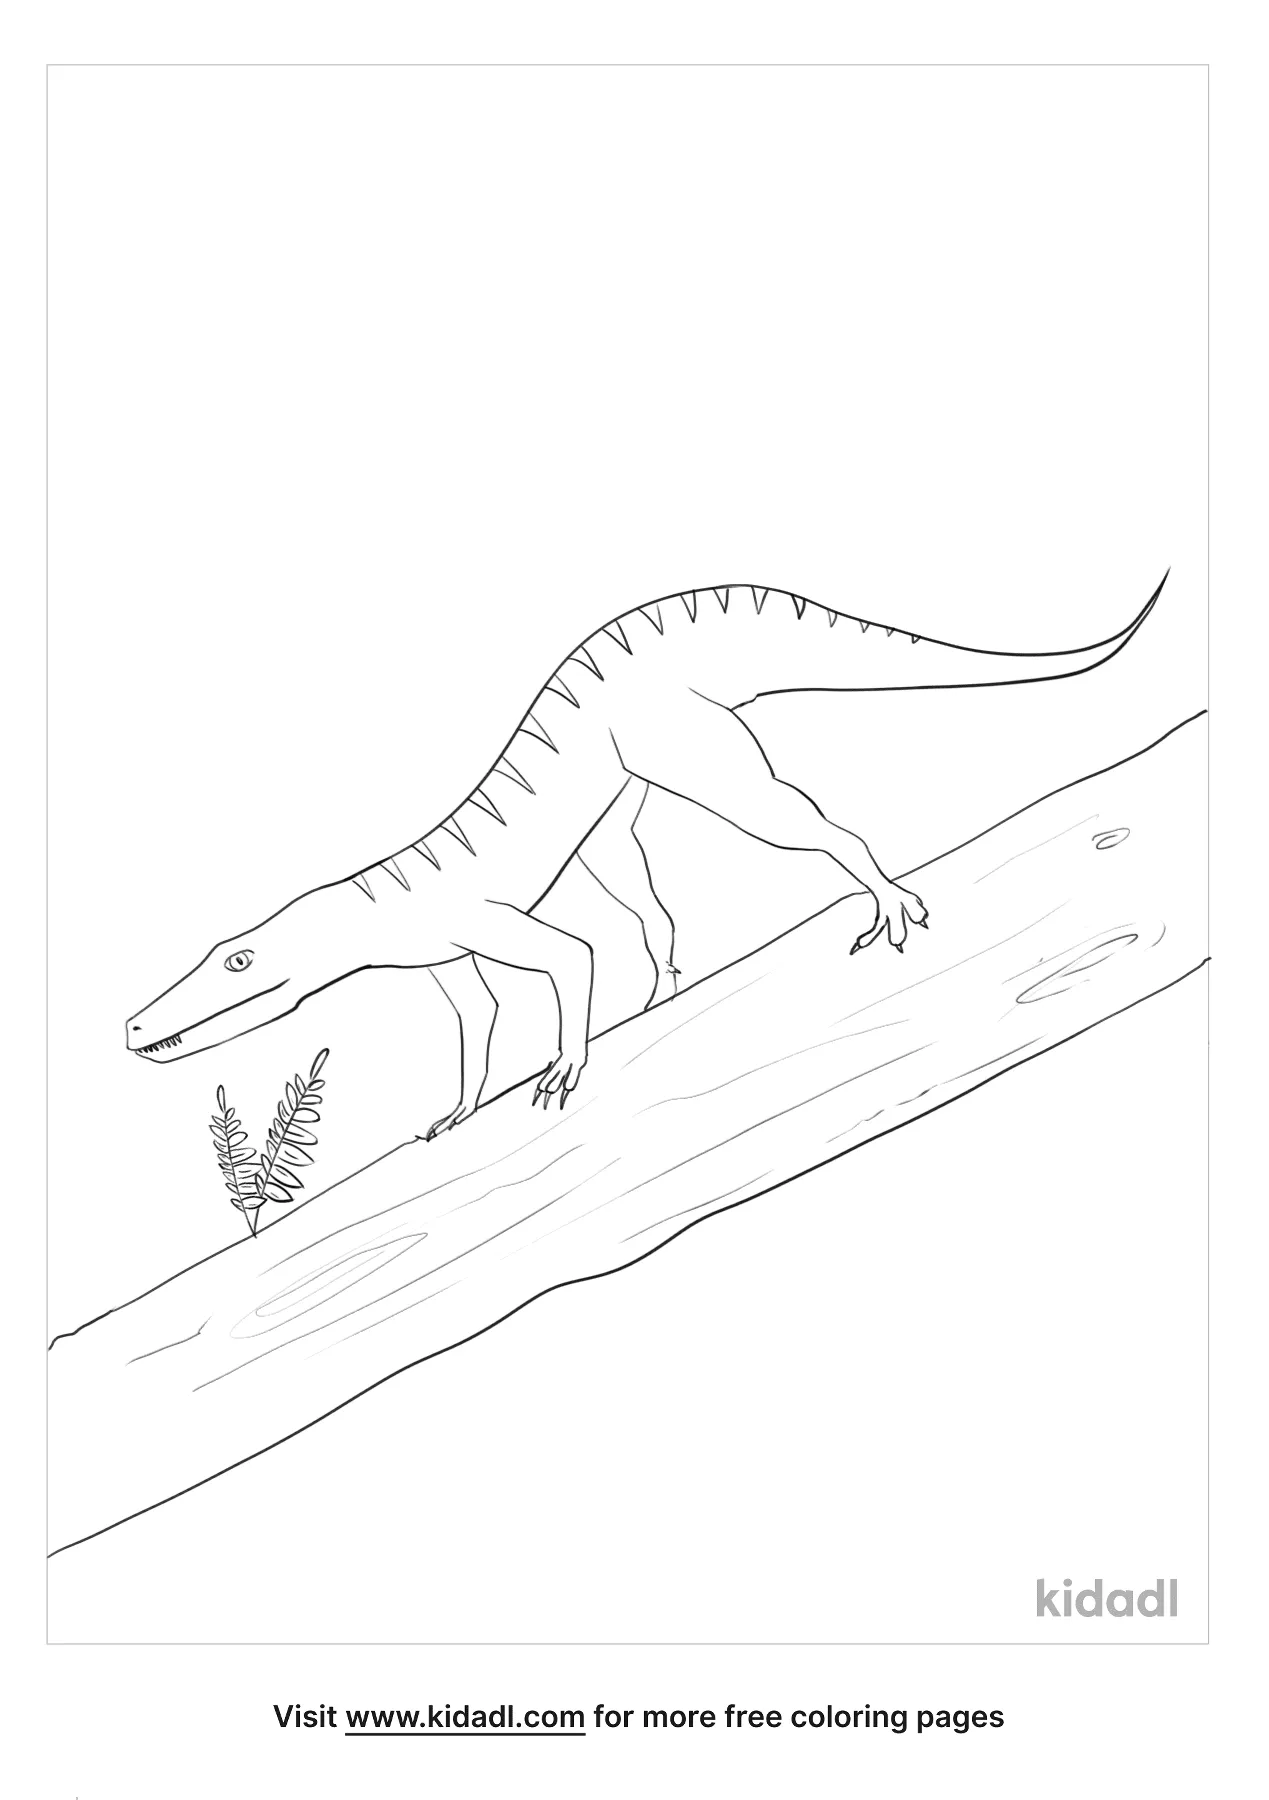 Hesperosuchus Coloring Page